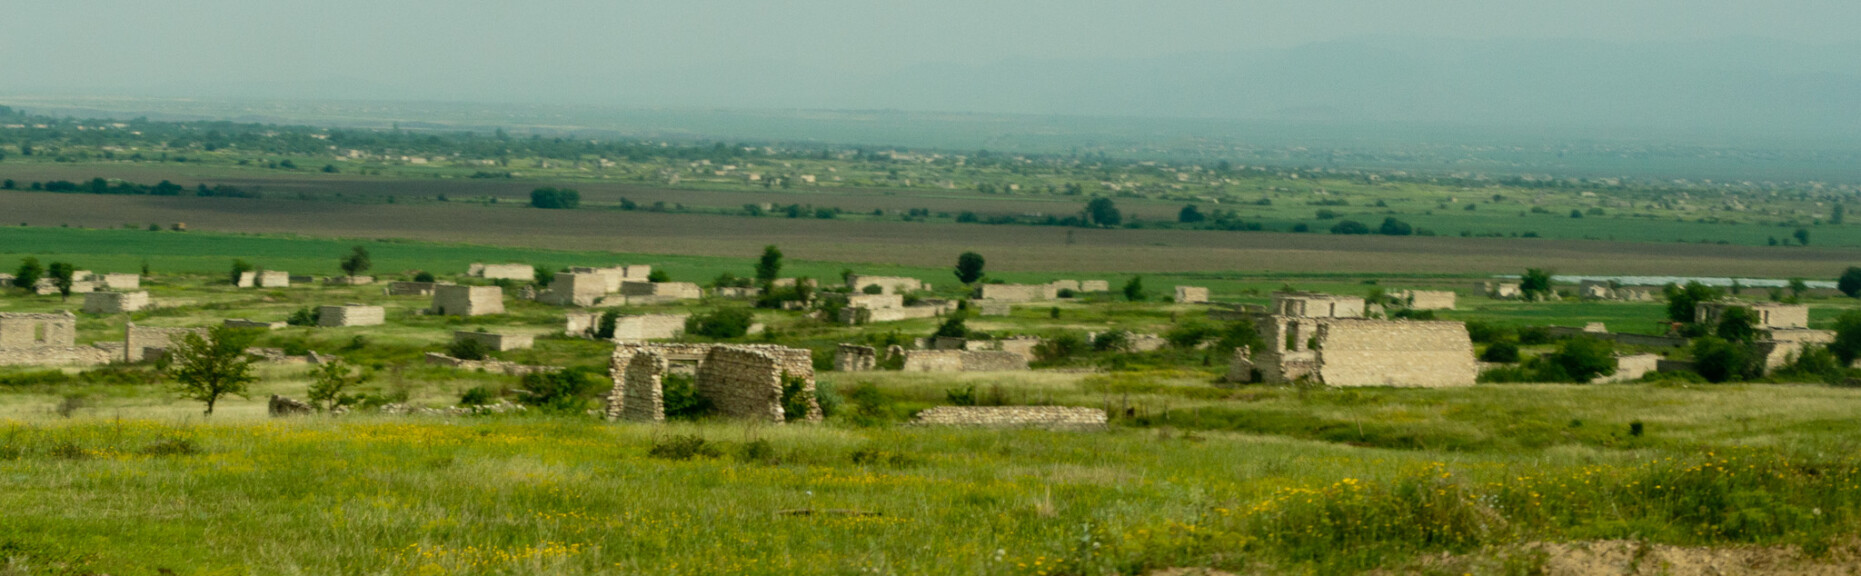 The ruins of the city of Agdam in the Nagorno Karabakh region